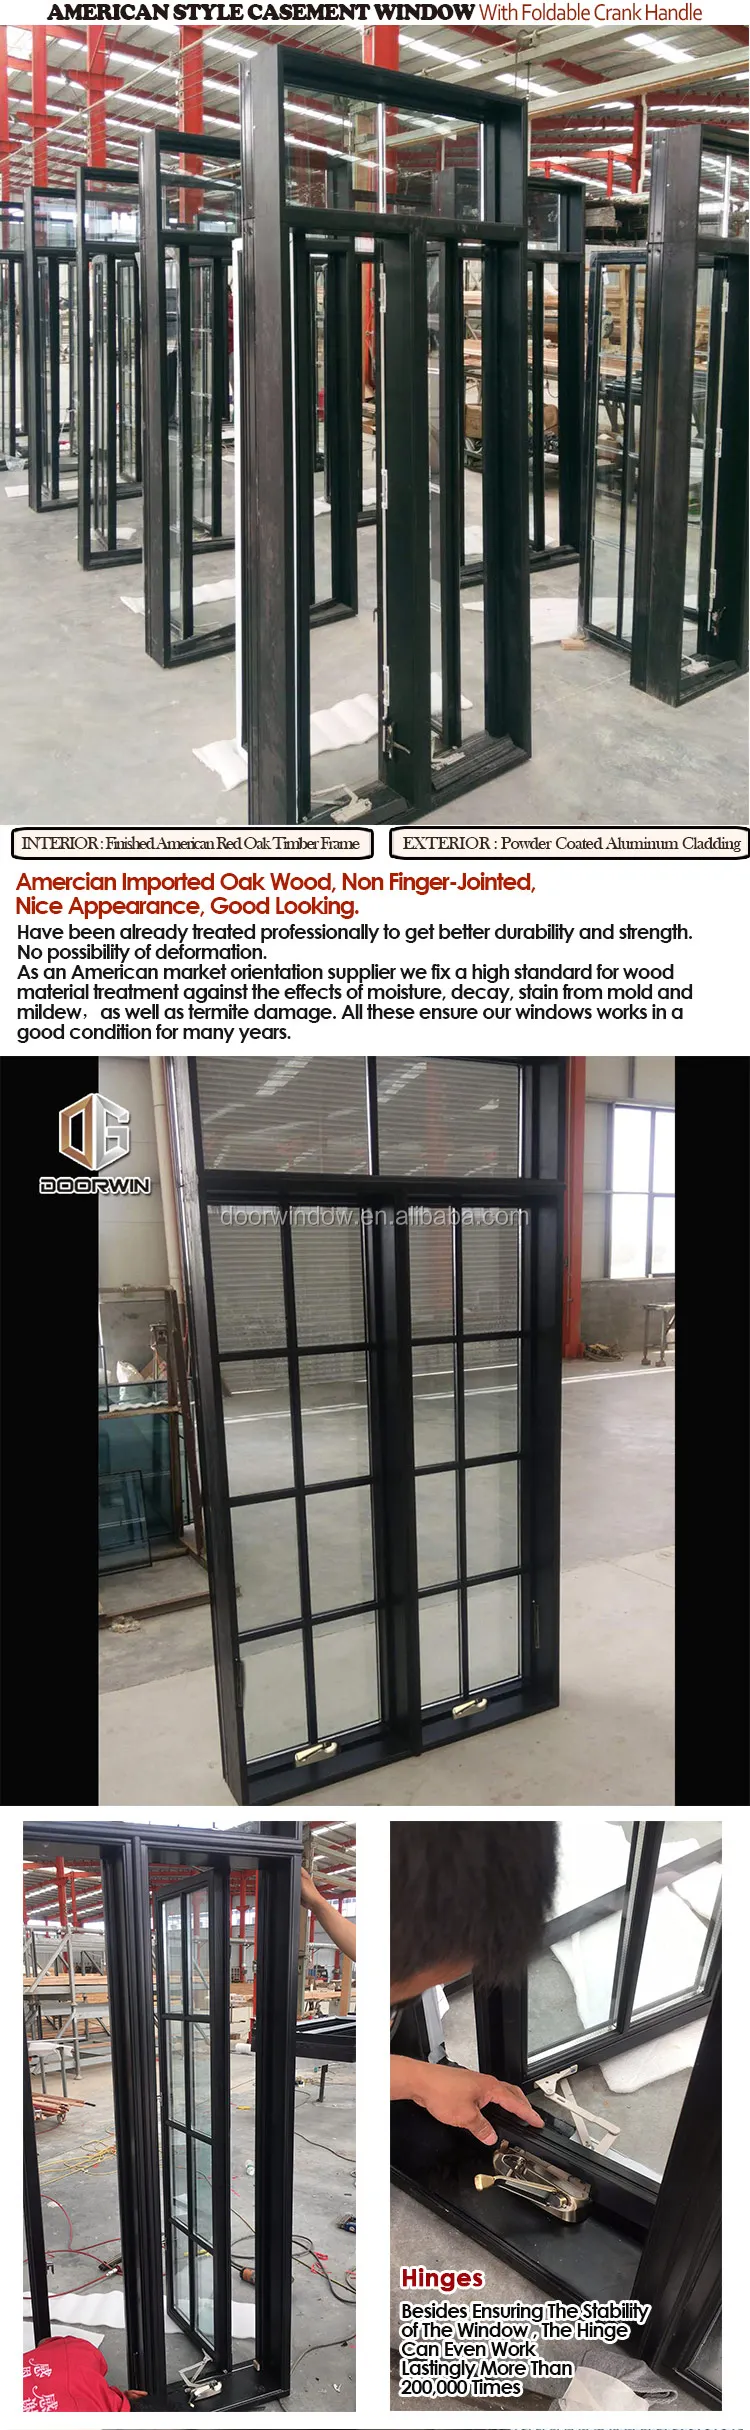 China doors and windows grill design and mosquito net chain winder awning window with manual crank